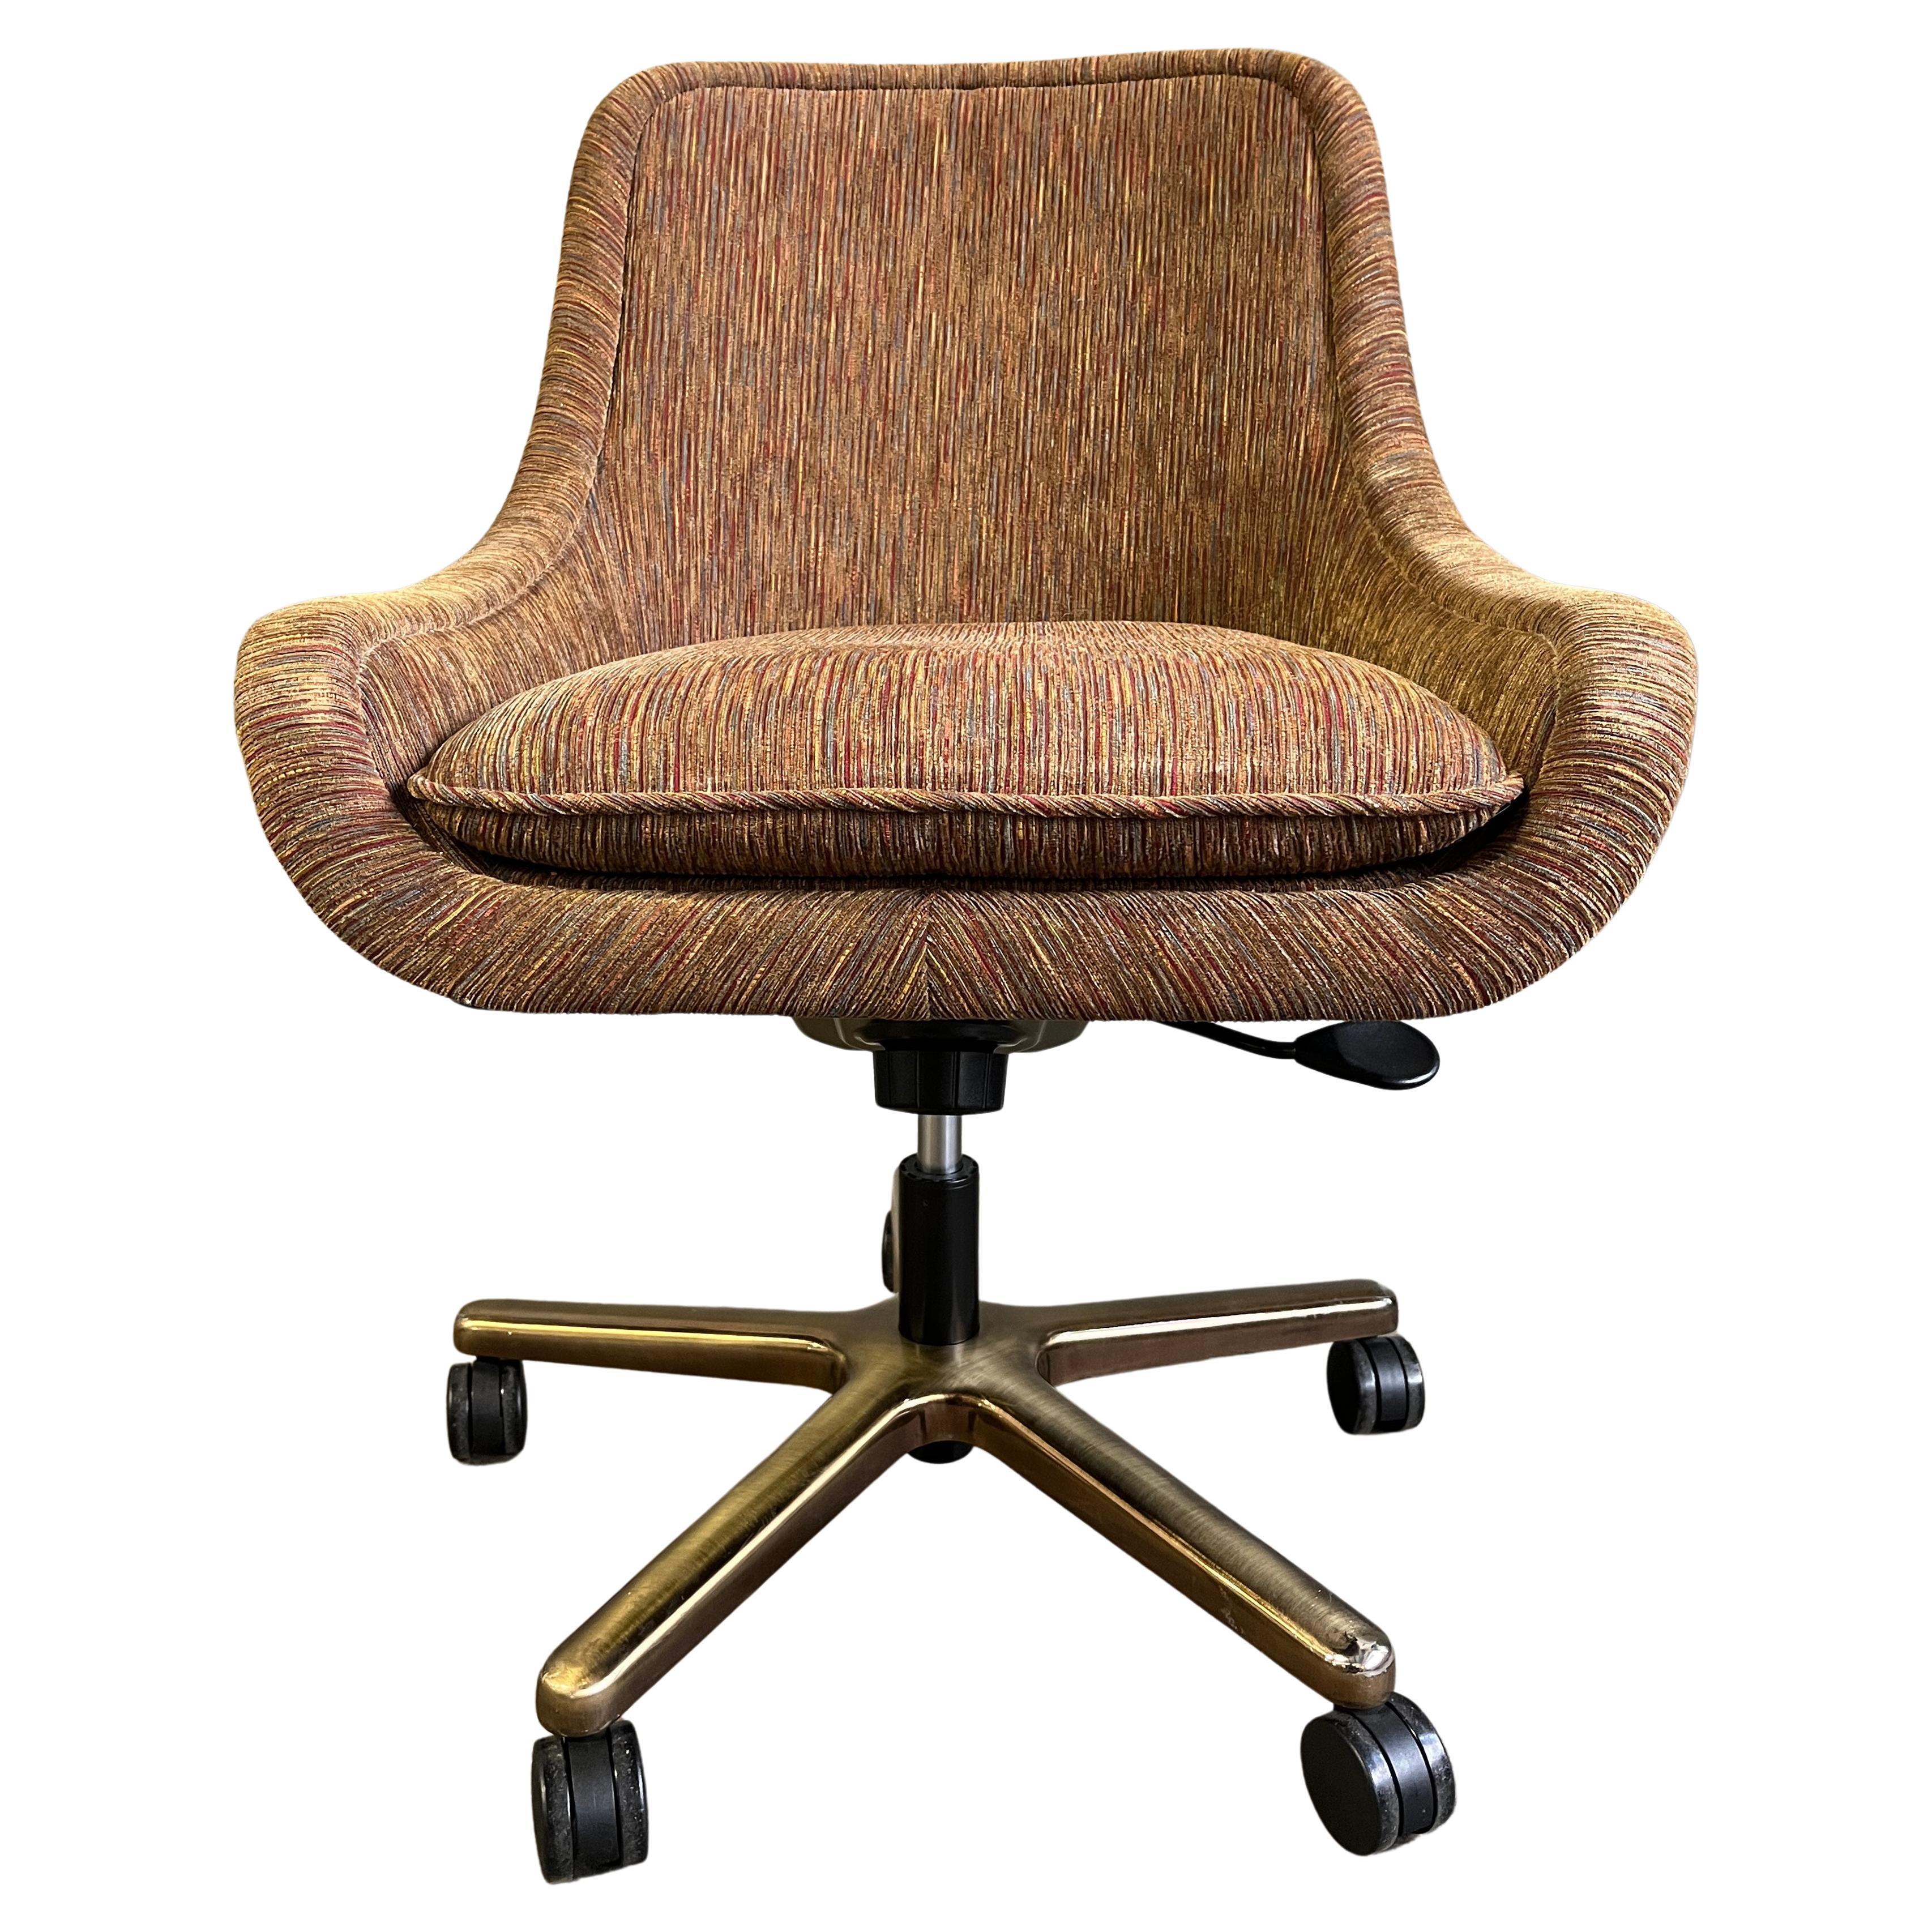 Naoto Fukasawa Office Swivel Chairs Geiger for Herman Miller